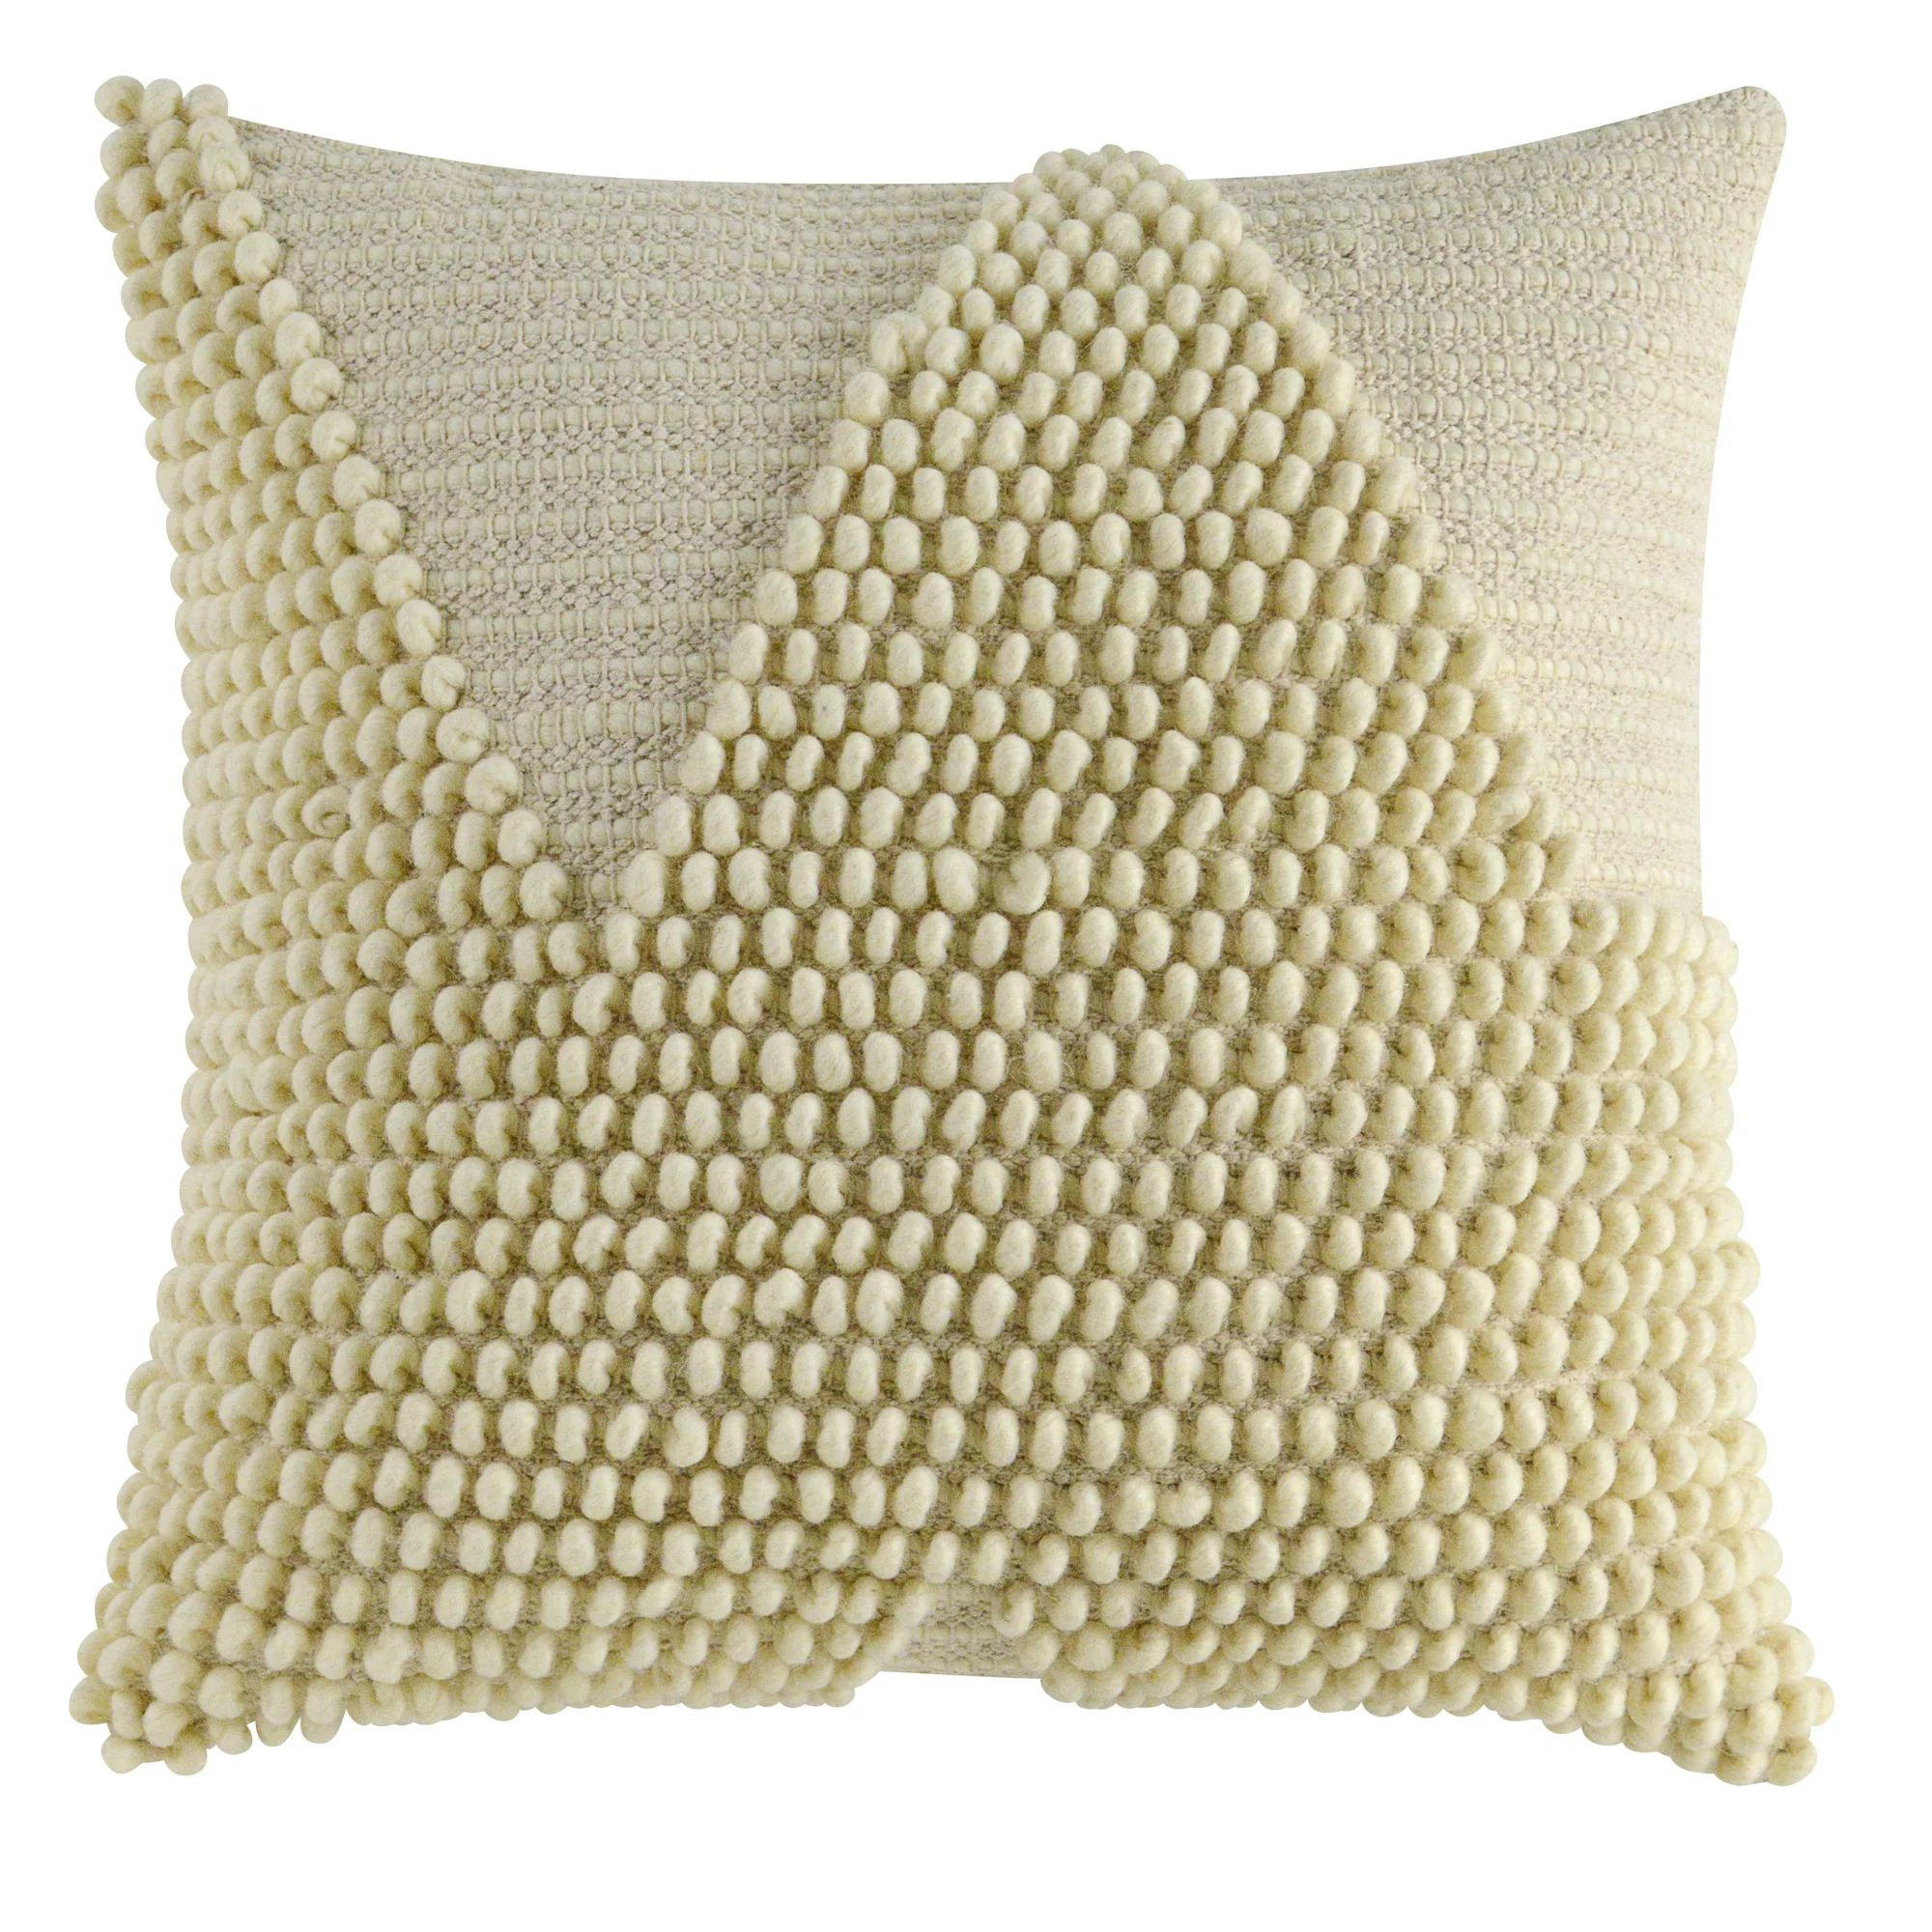 Better Homes & Gardens Handcrafted Looped Triangle Decorative Throw Pillow, 18"x18", Ivory | Walmart (US)